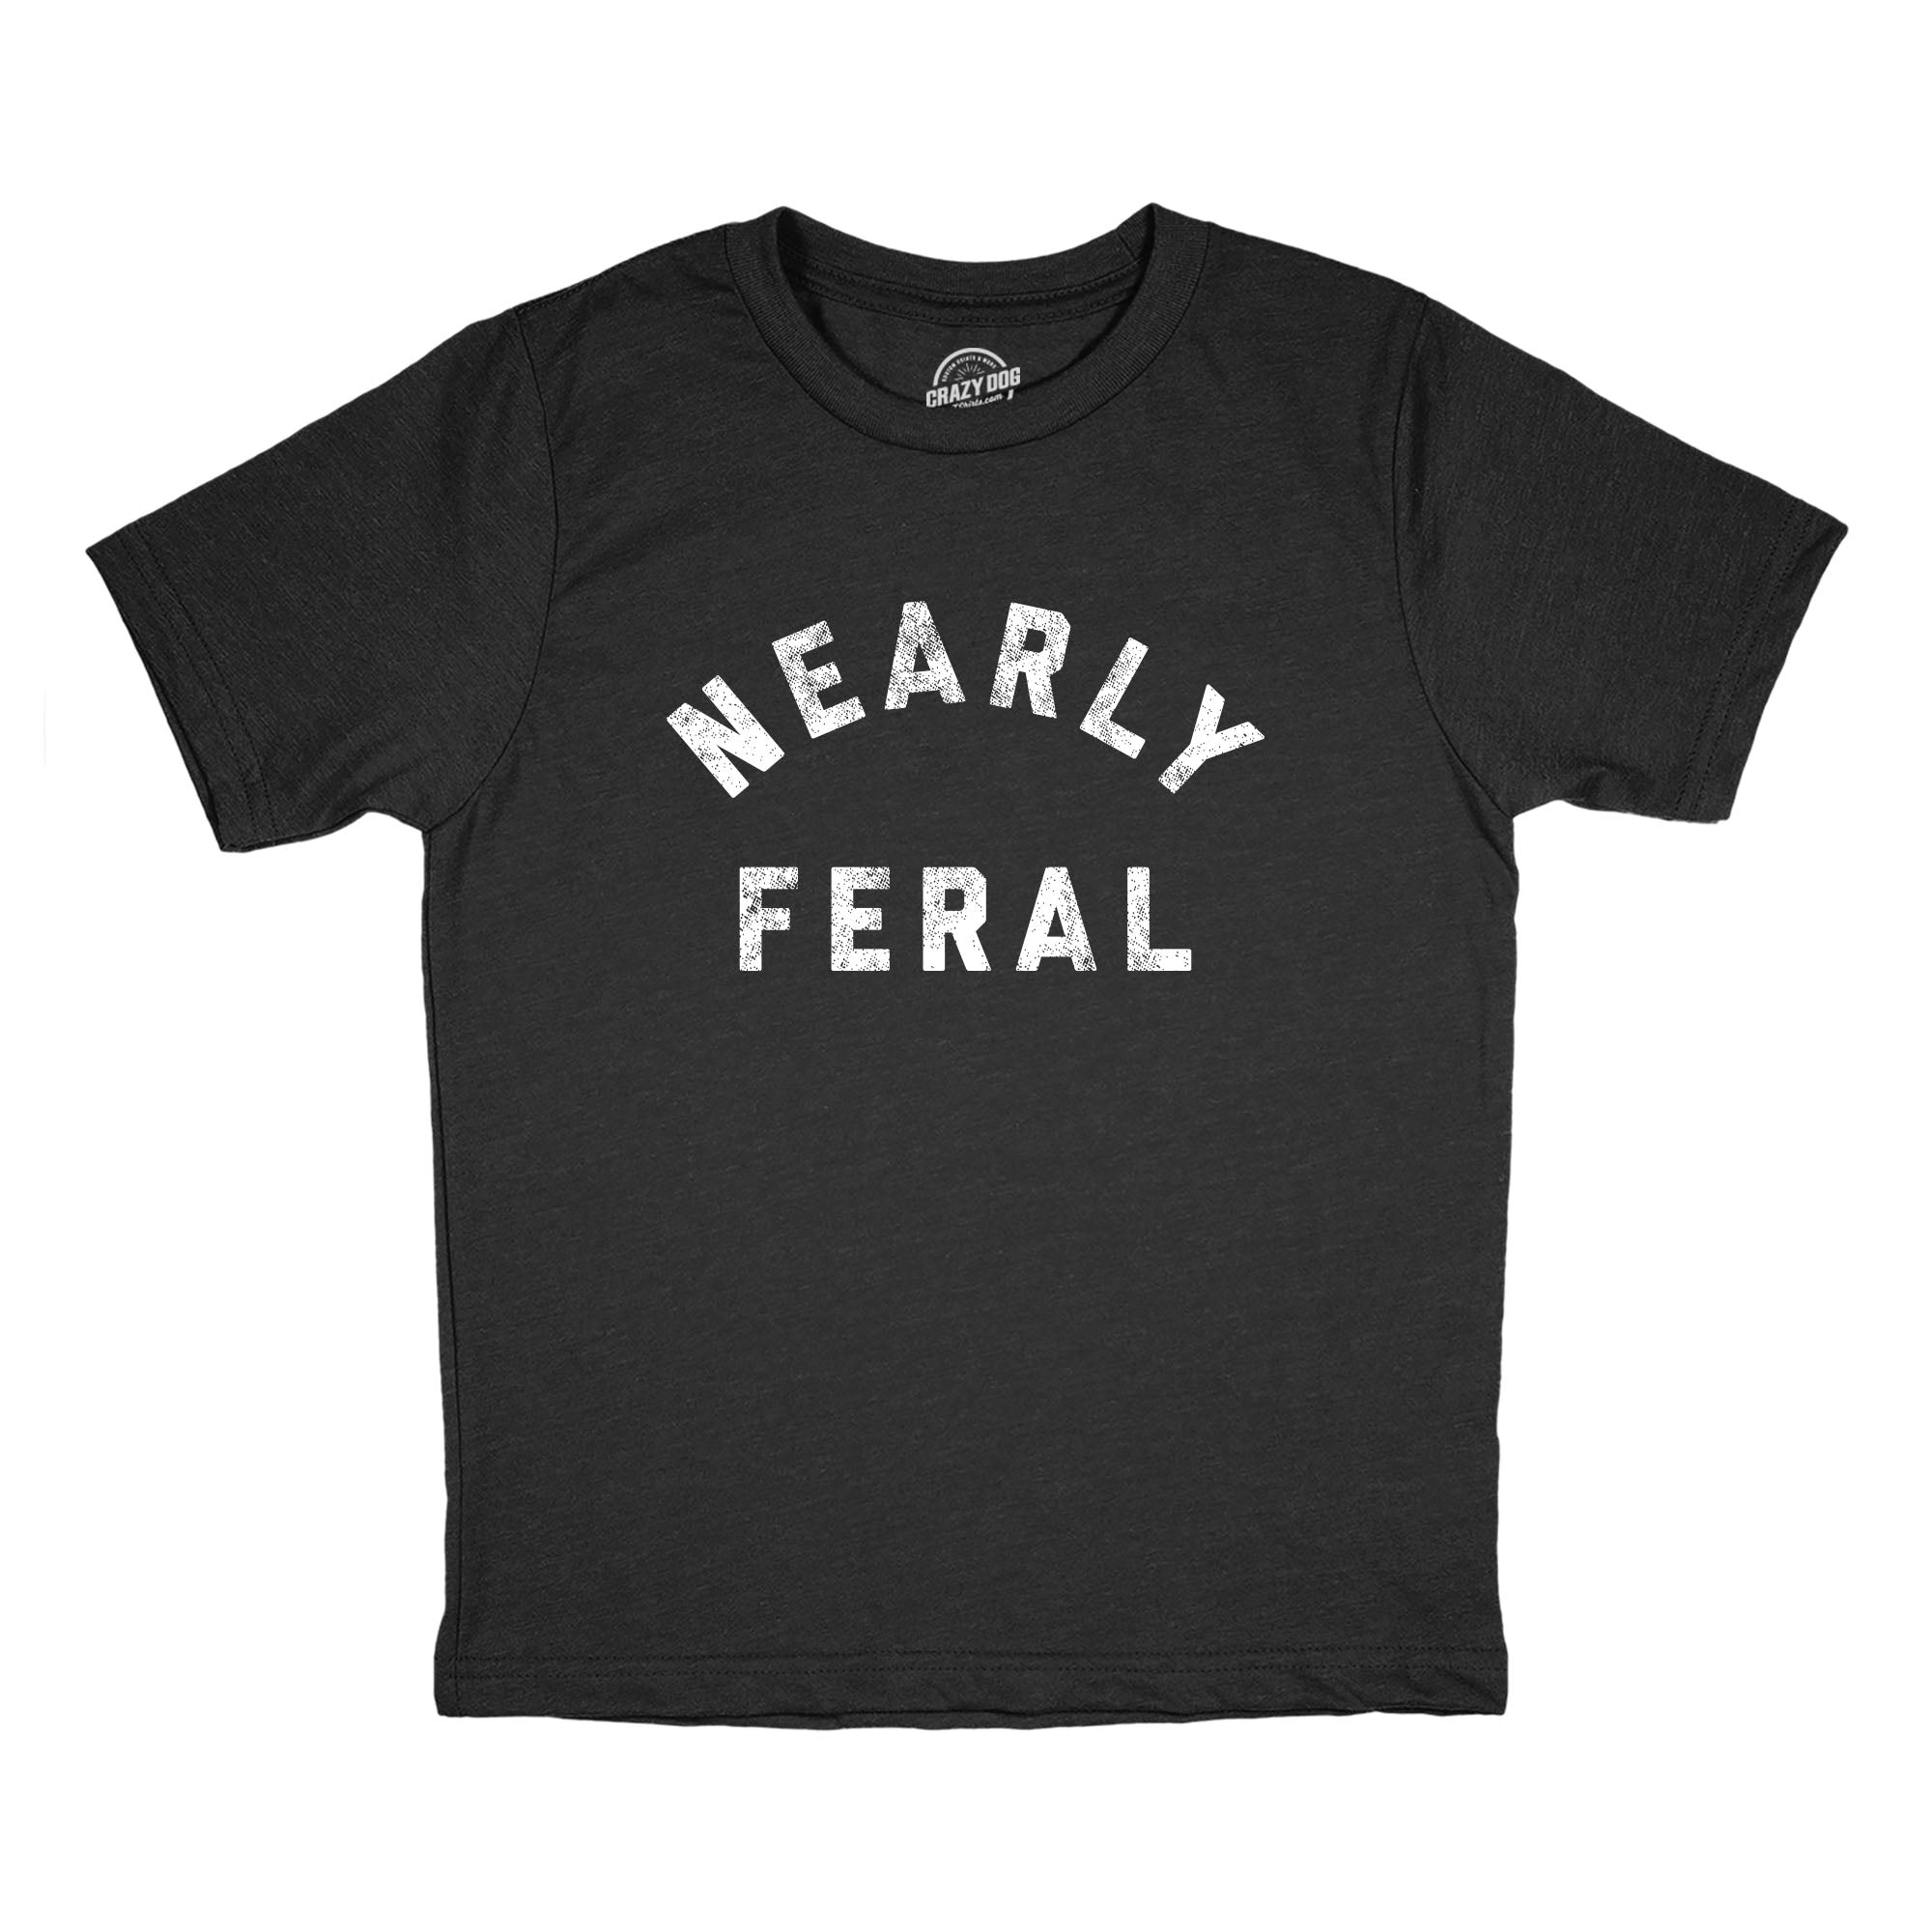 Funny Heather Black - FERAL Nearly Feral Youth T Shirt Nerdy animal Sarcastic Tee